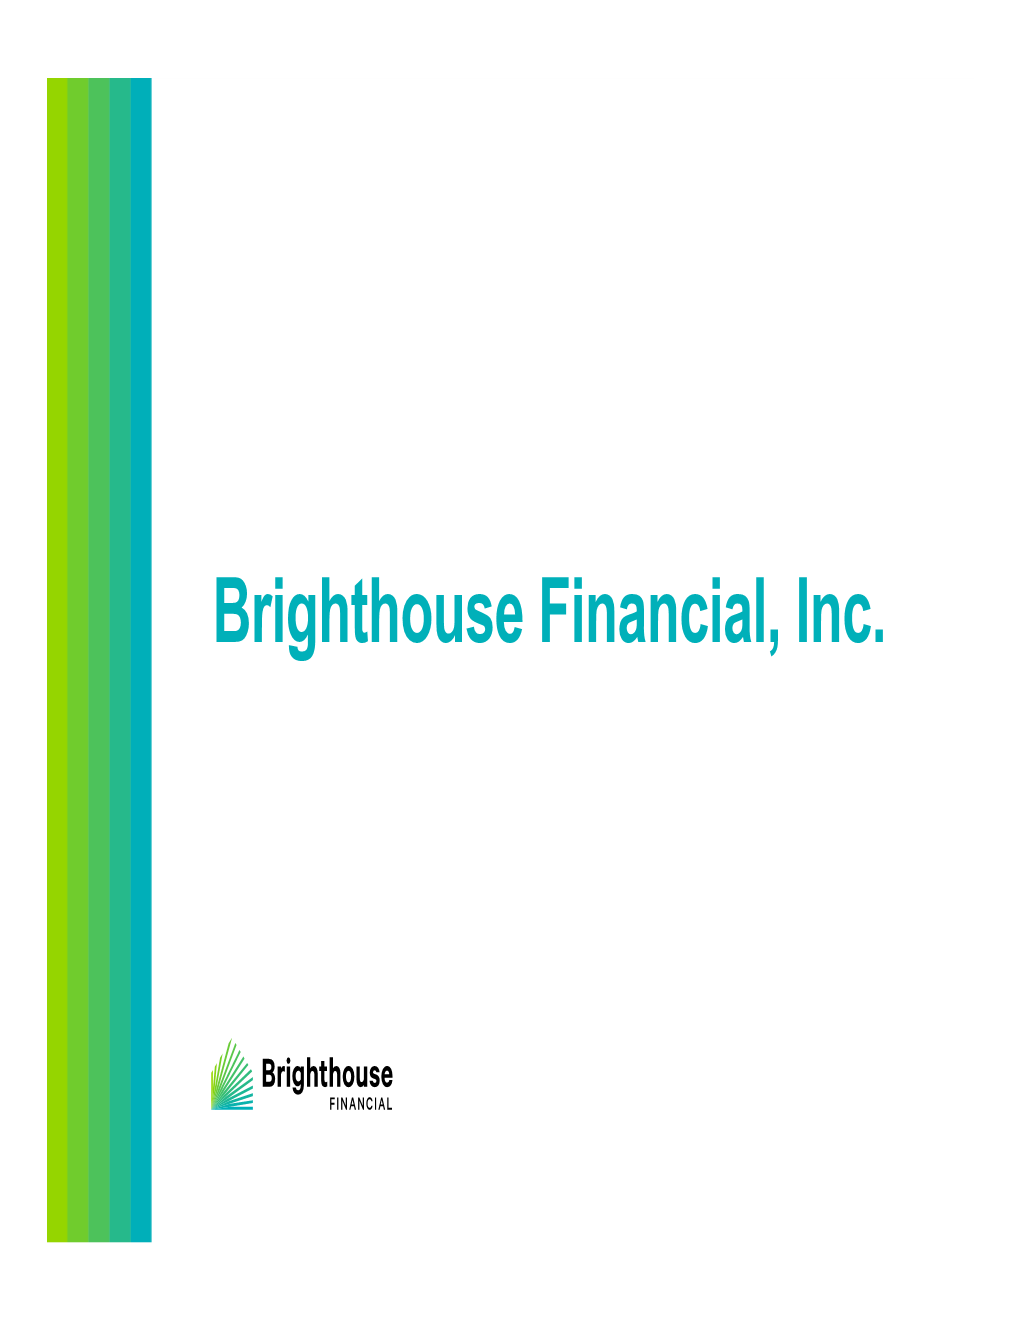 Brighthouse Financial, Inc. Note Regarding Forward-Looking Statements